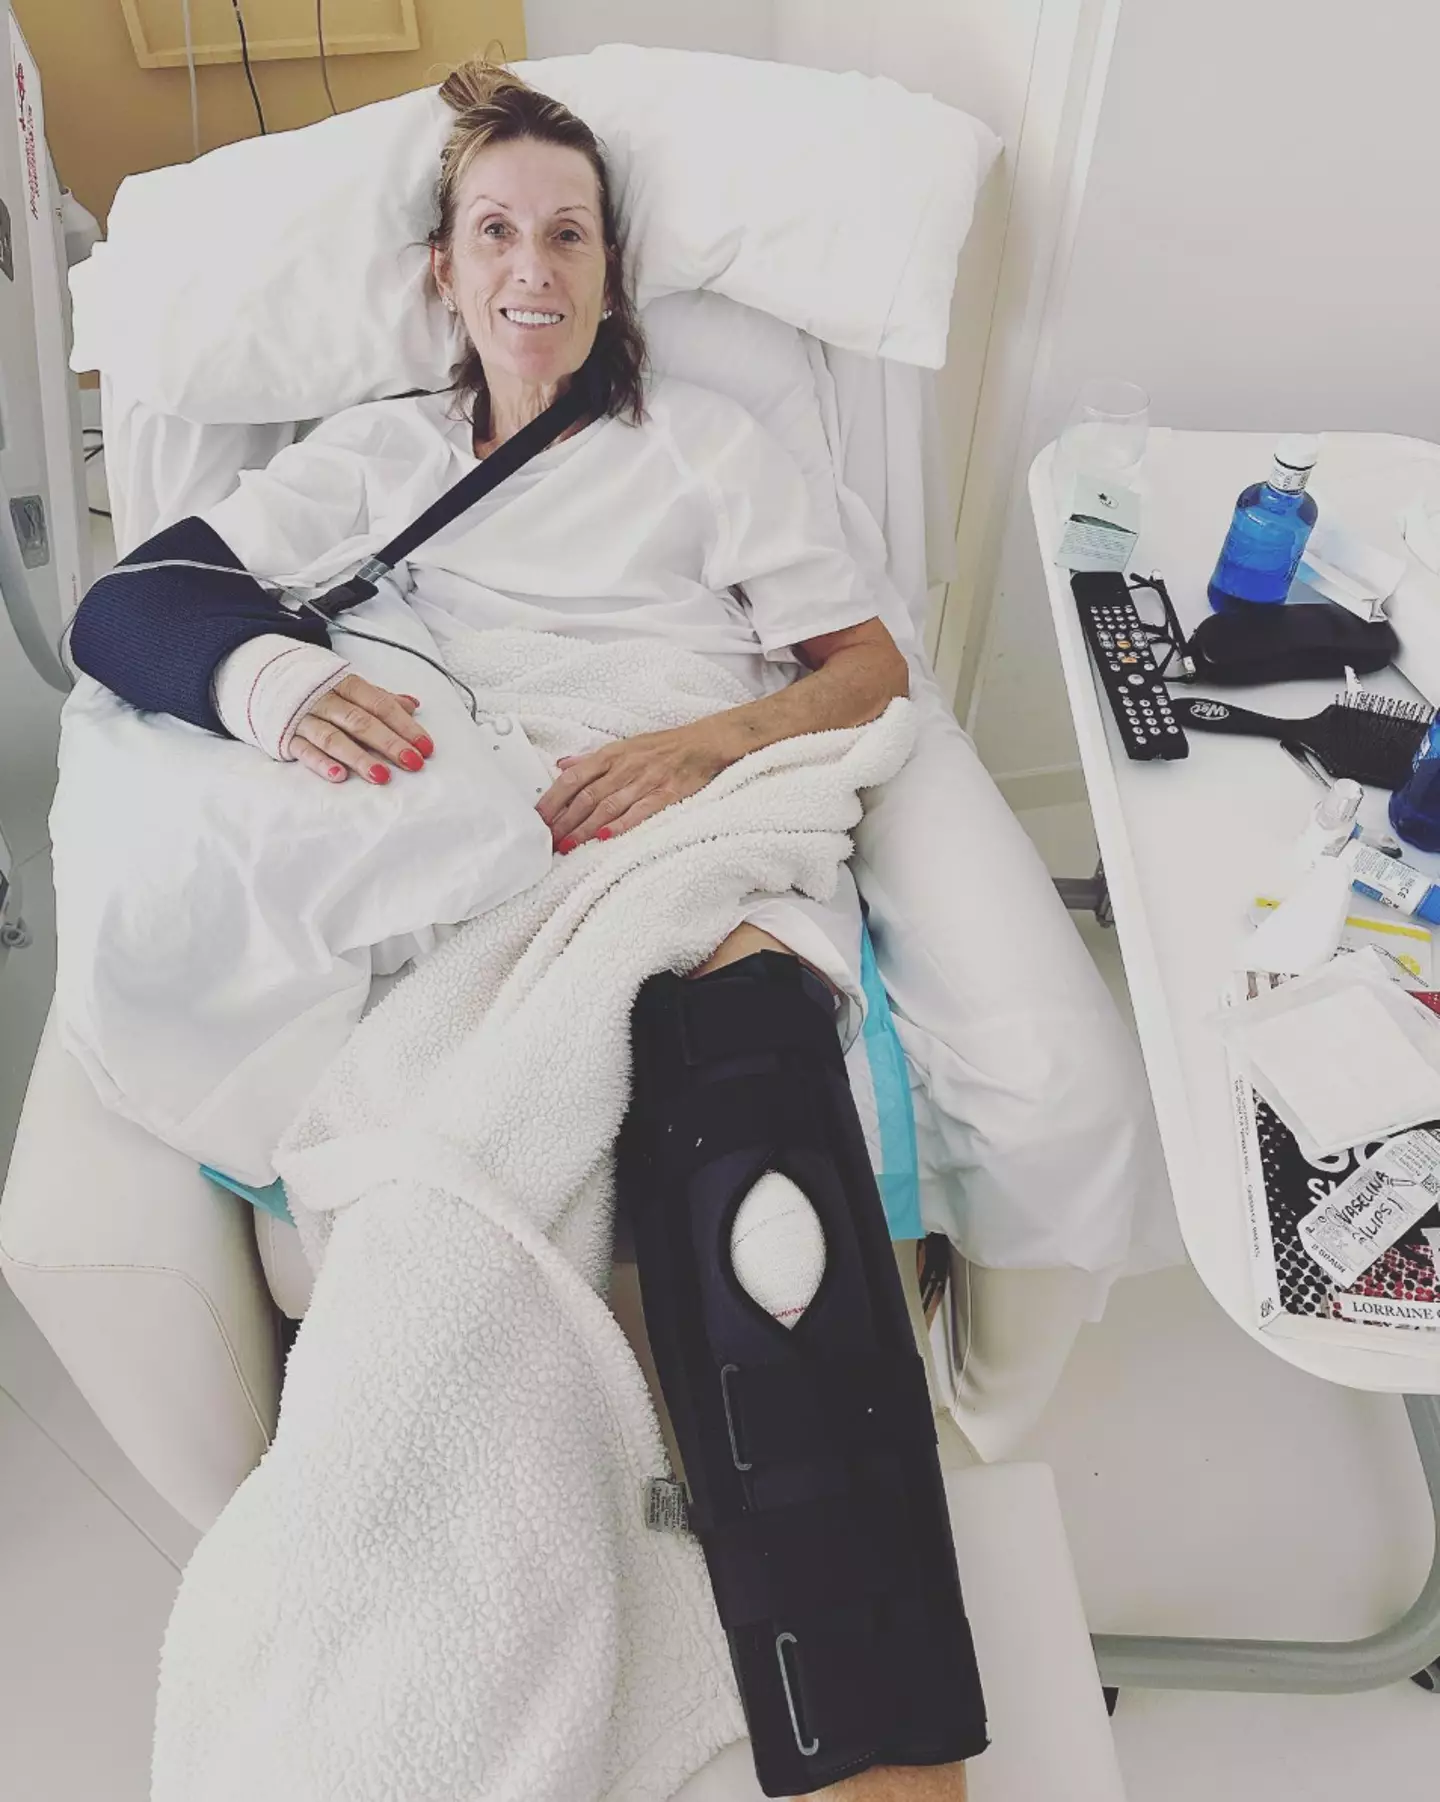 Rylan Clark shared a picture of his mum Linda in her hospital bed.